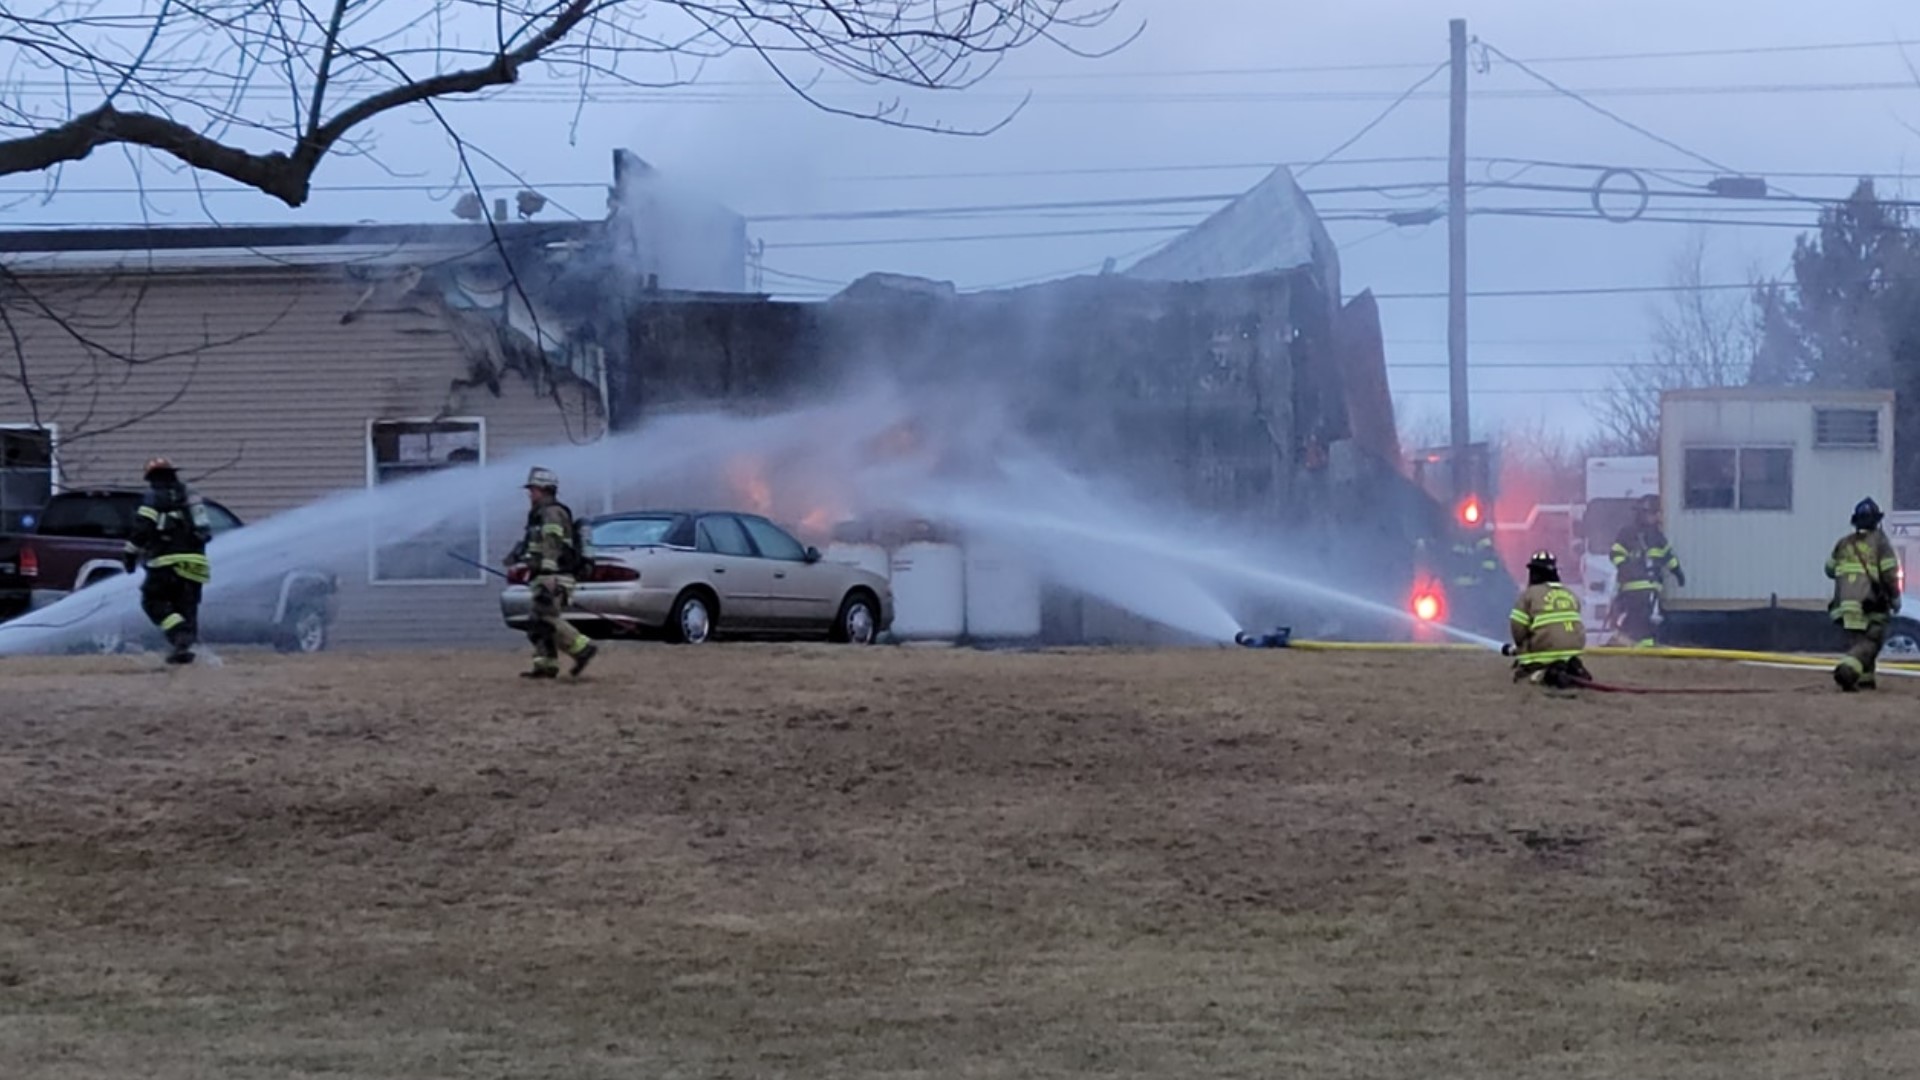 The structure caught on fire is believed to be Ed's Automotive and Services located in the 1300 block of East Main Street in Annville Township.